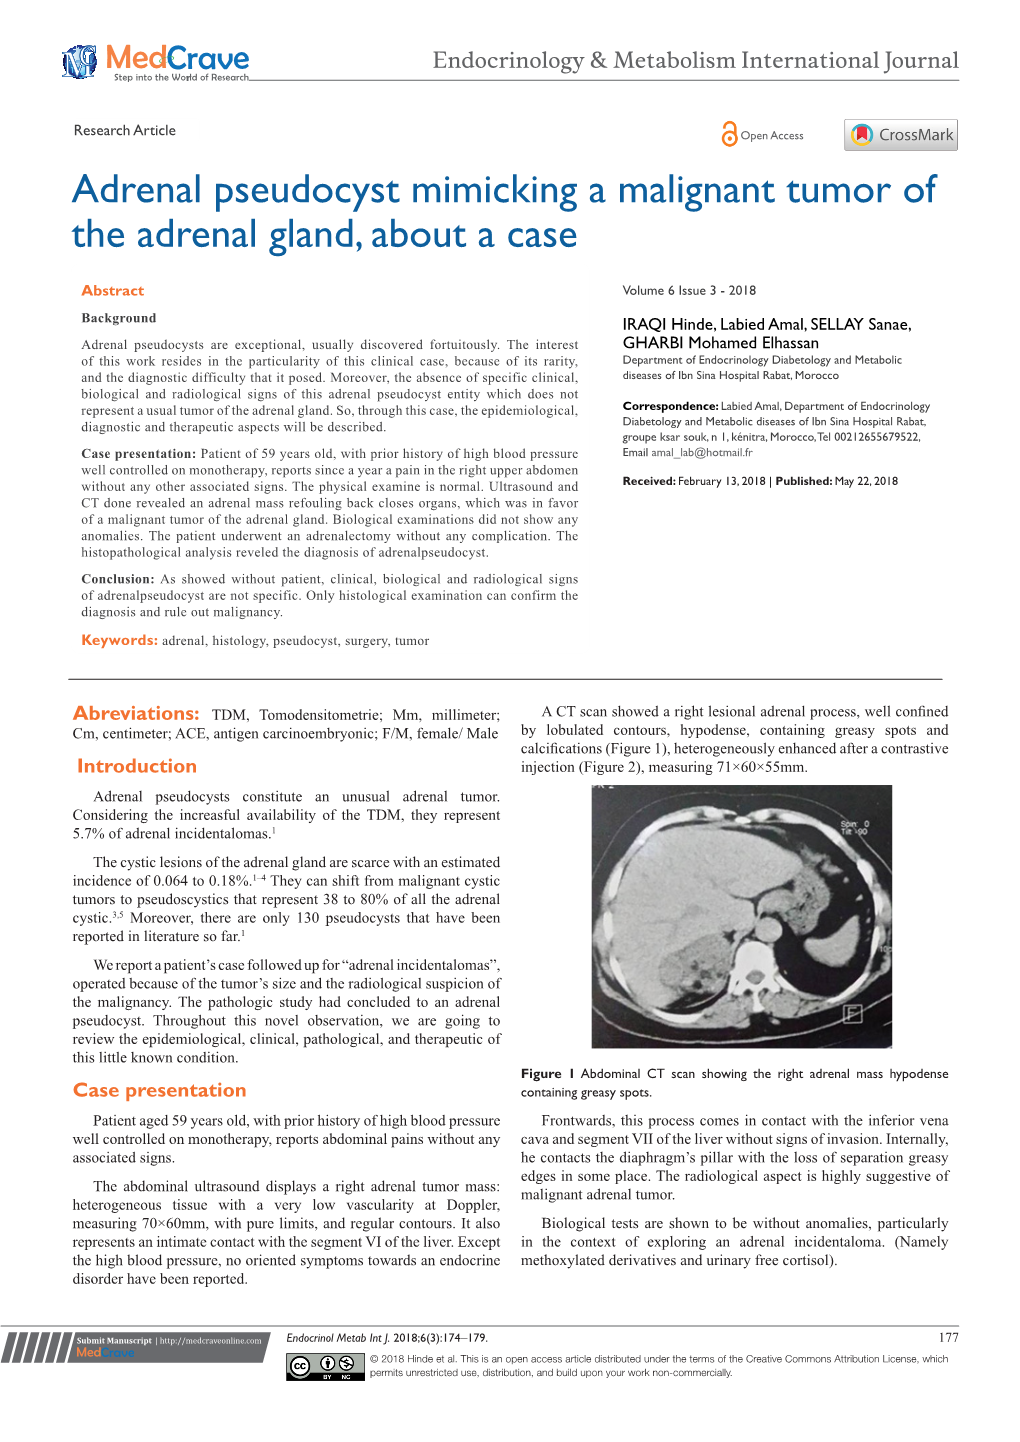 Adrenal Pseudocyst Mimicking a Malignant Tumor of the Adrenal Gland, About a Case